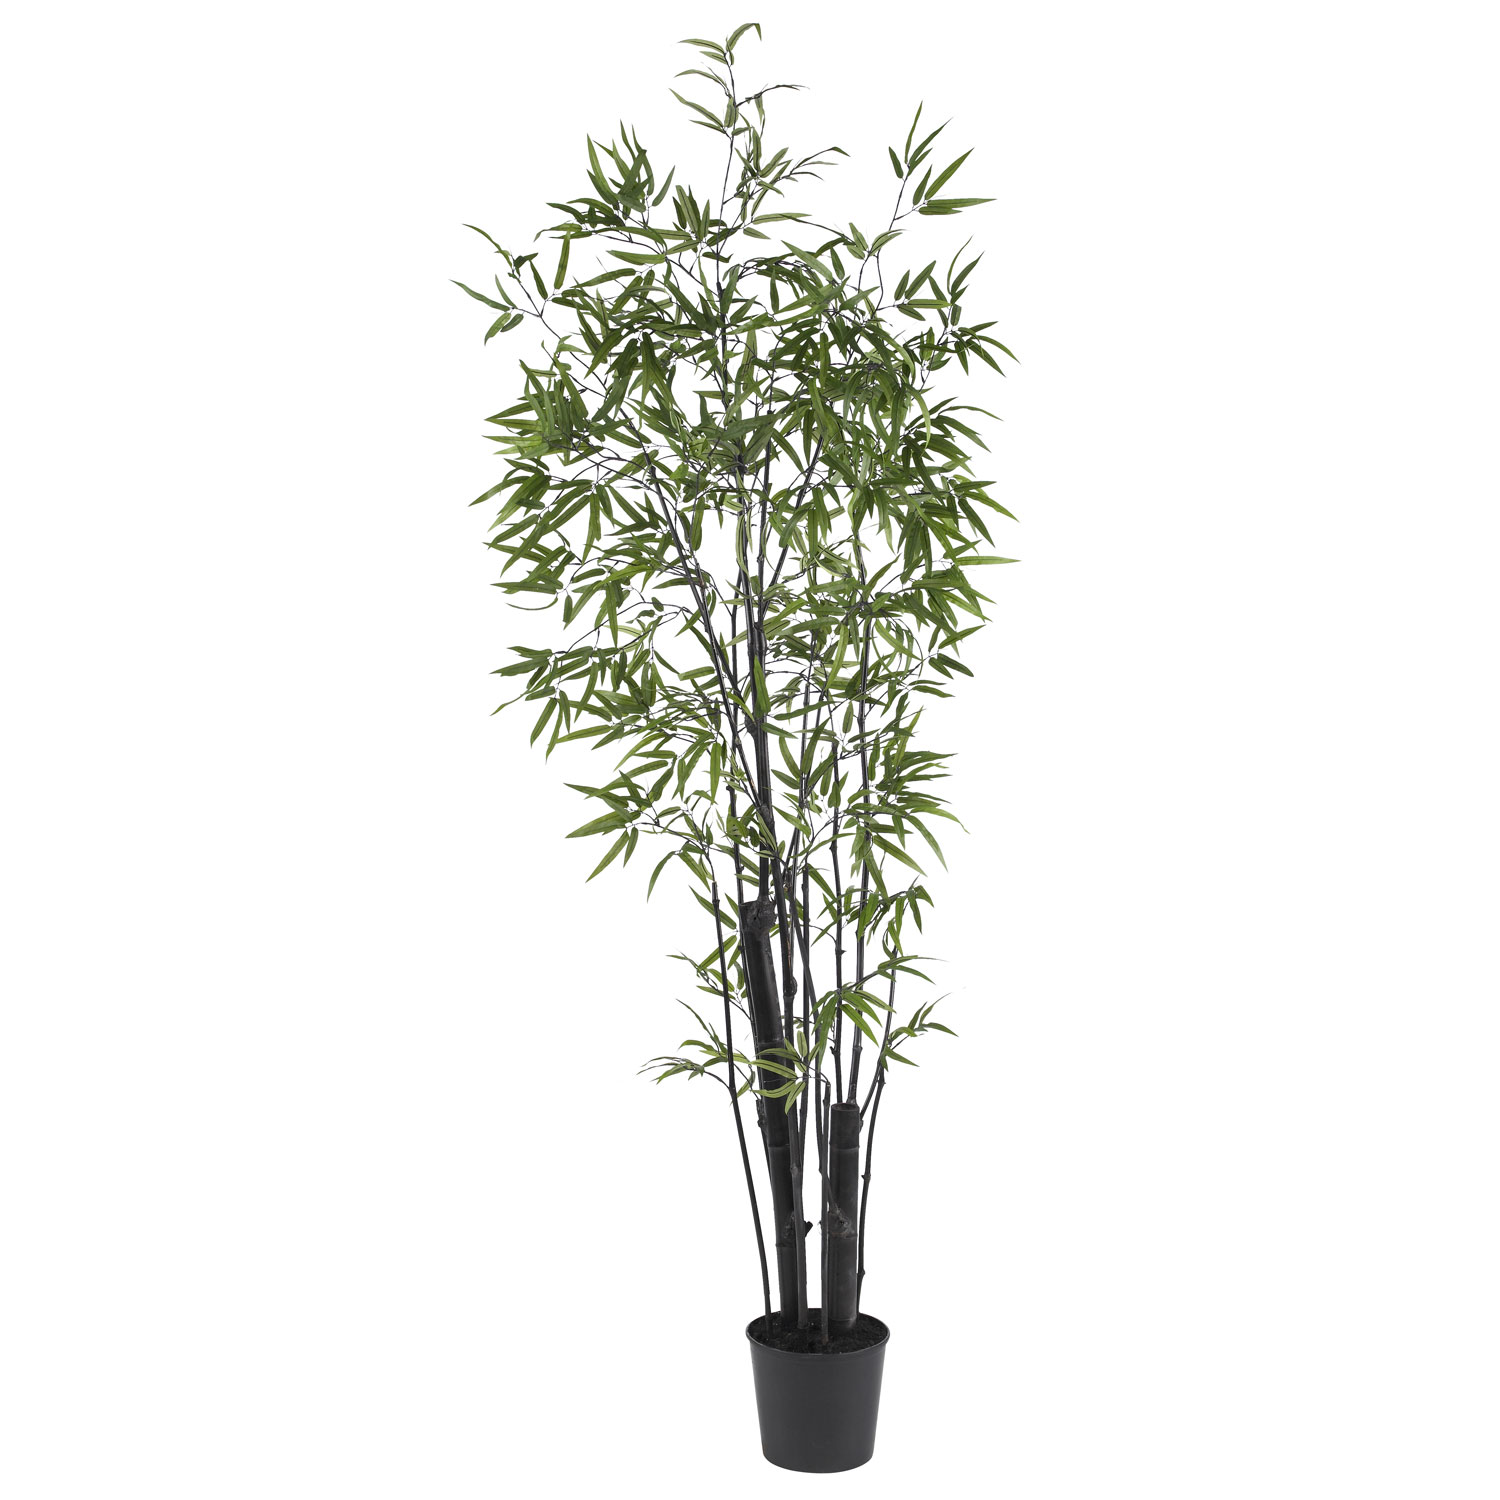 6 Foot Black Bamboo Tree: Potted